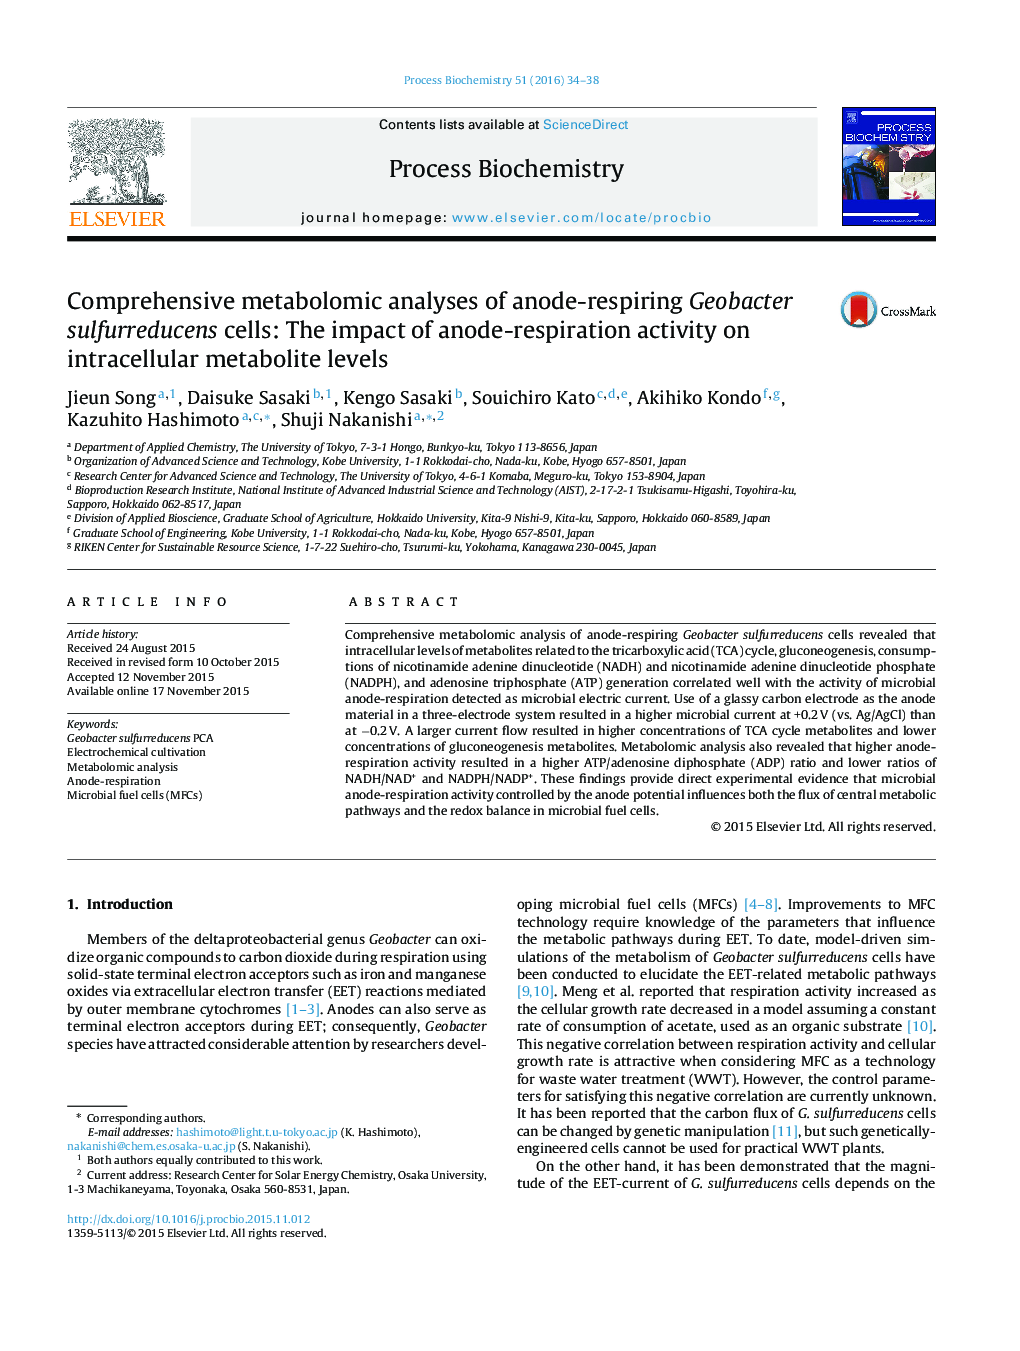 Comprehensive metabolomic analyses of anode-respiring Geobacter sulfurreducens cells: The impact of anode-respiration activity on intracellular metabolite levels